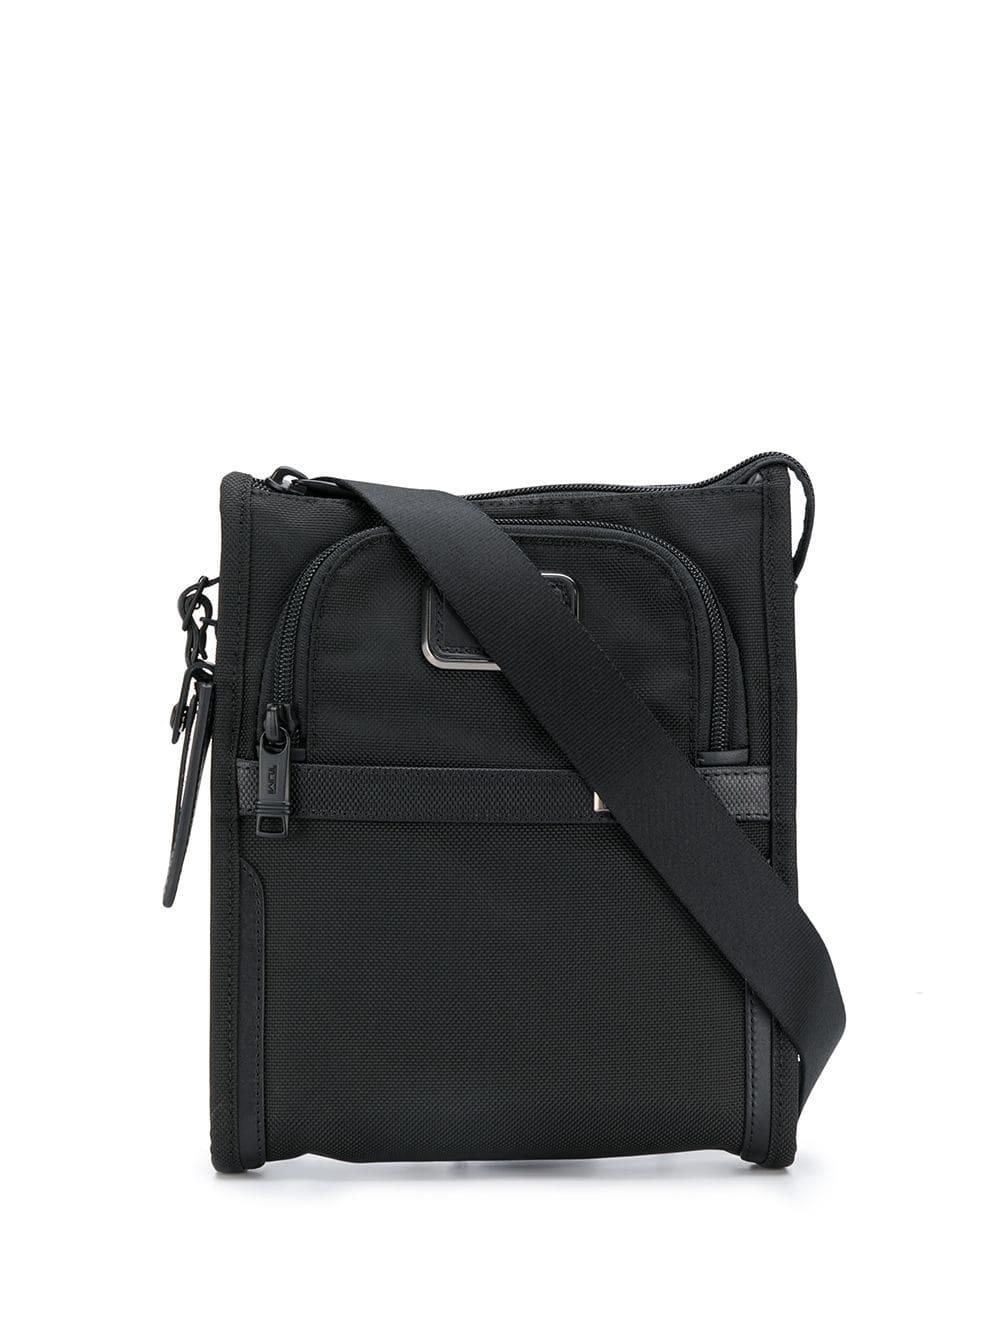 Tumi Leather Small Pocket Bag in Black for Men - Lyst